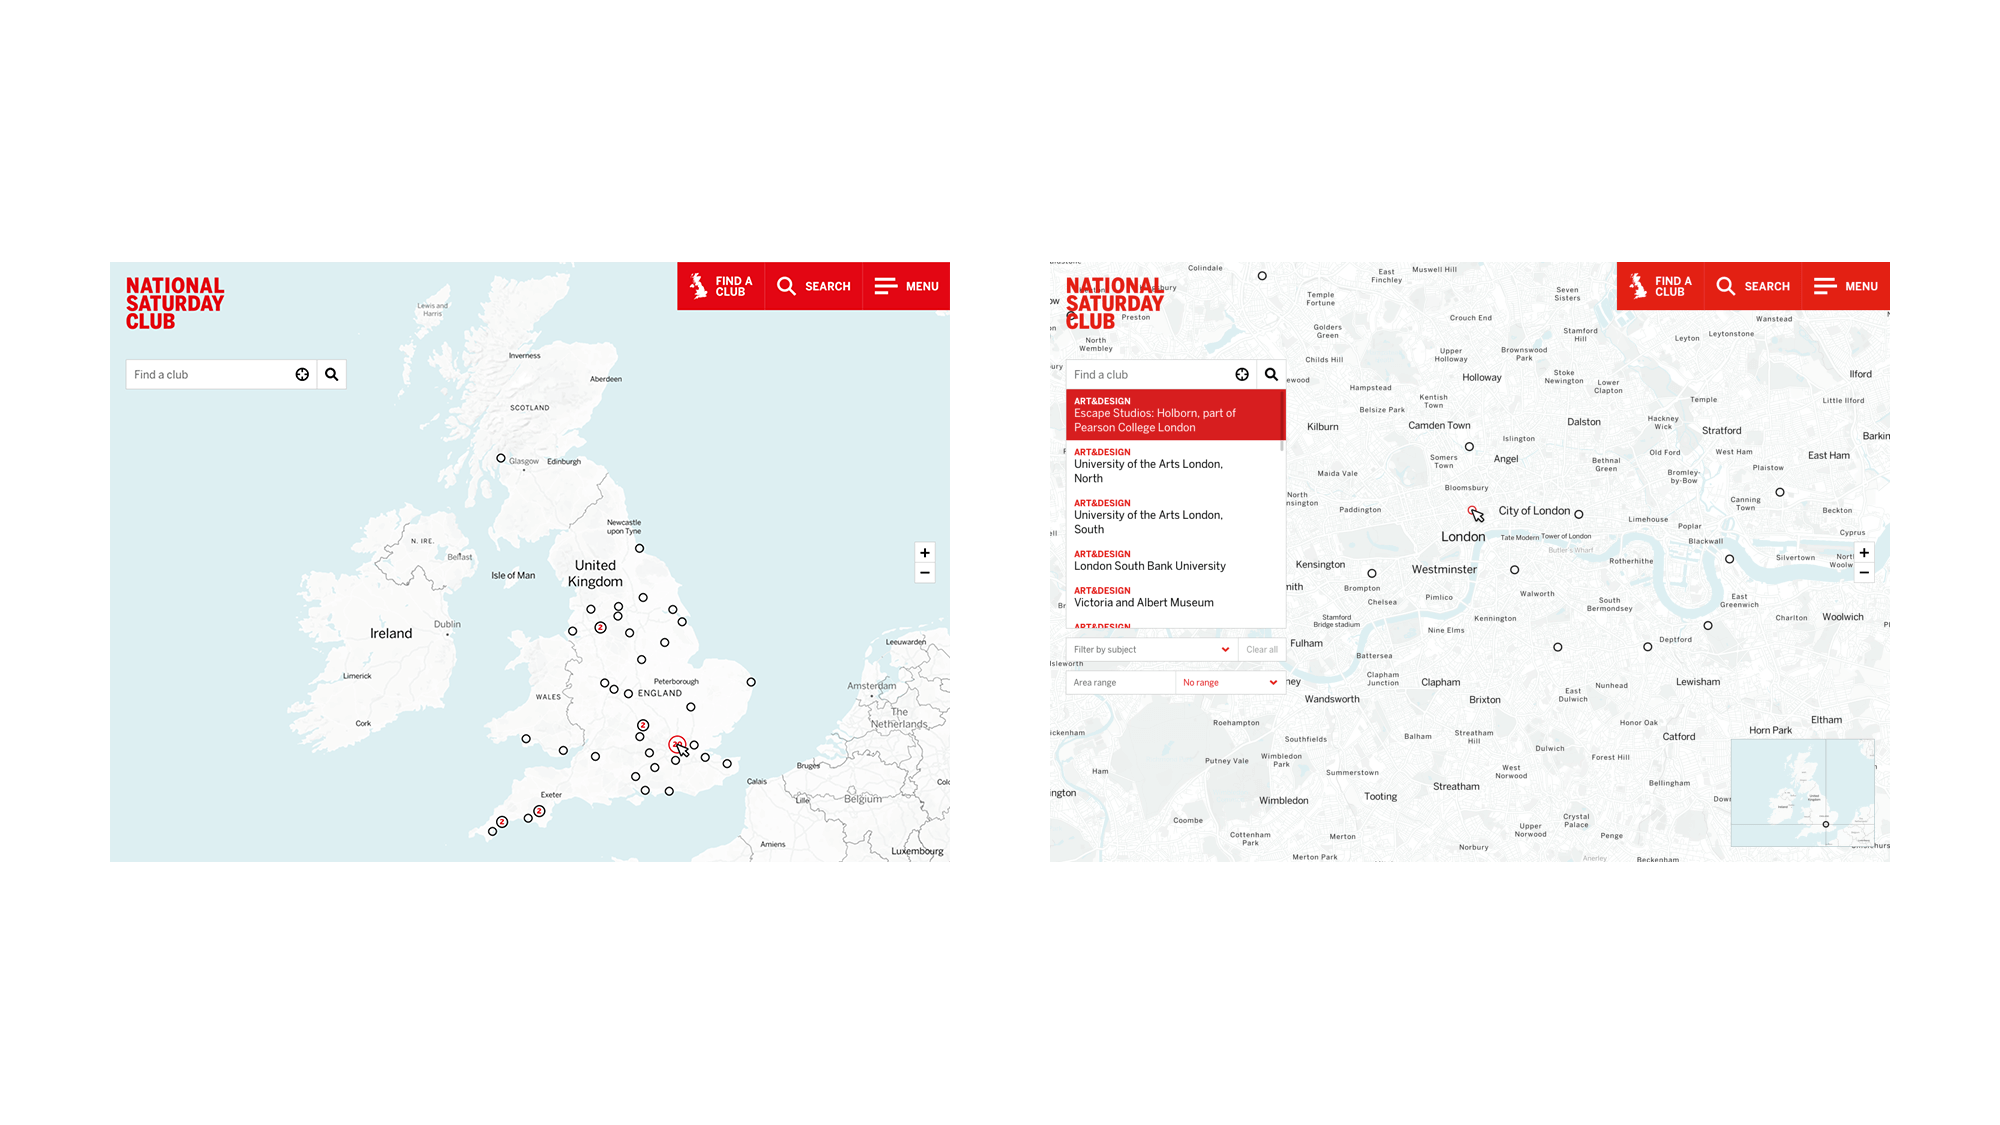 Selecting ‘London’ and ‘Escape Studios’ (select an area on the map option) on National Saturday Club's interactive map